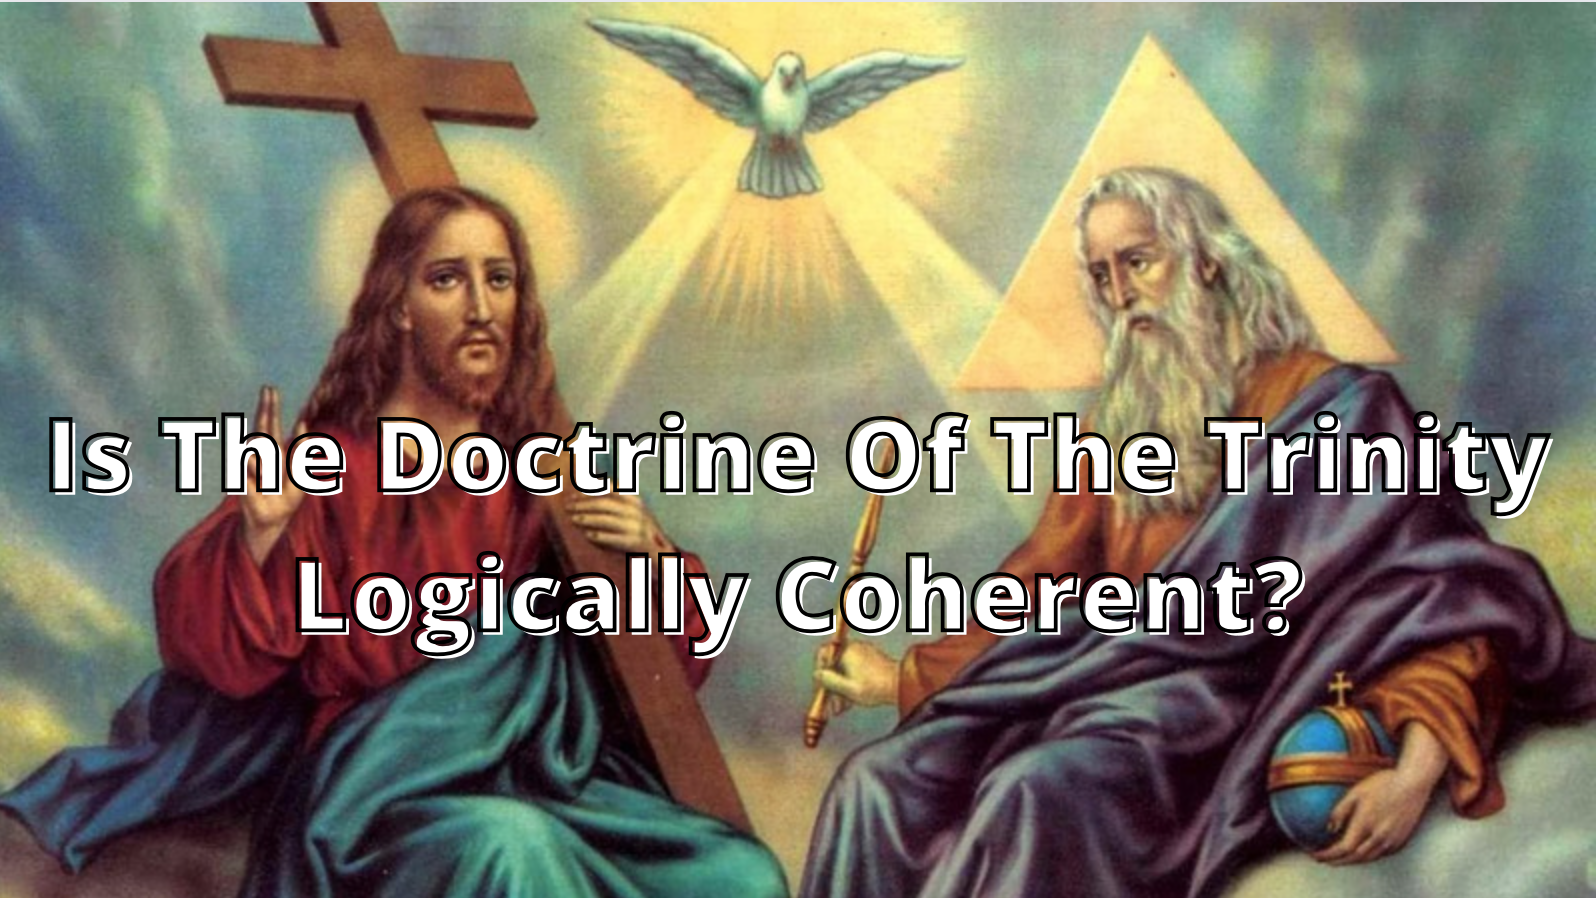 Is The Doctrine Of The Trinity Logically Coherent?